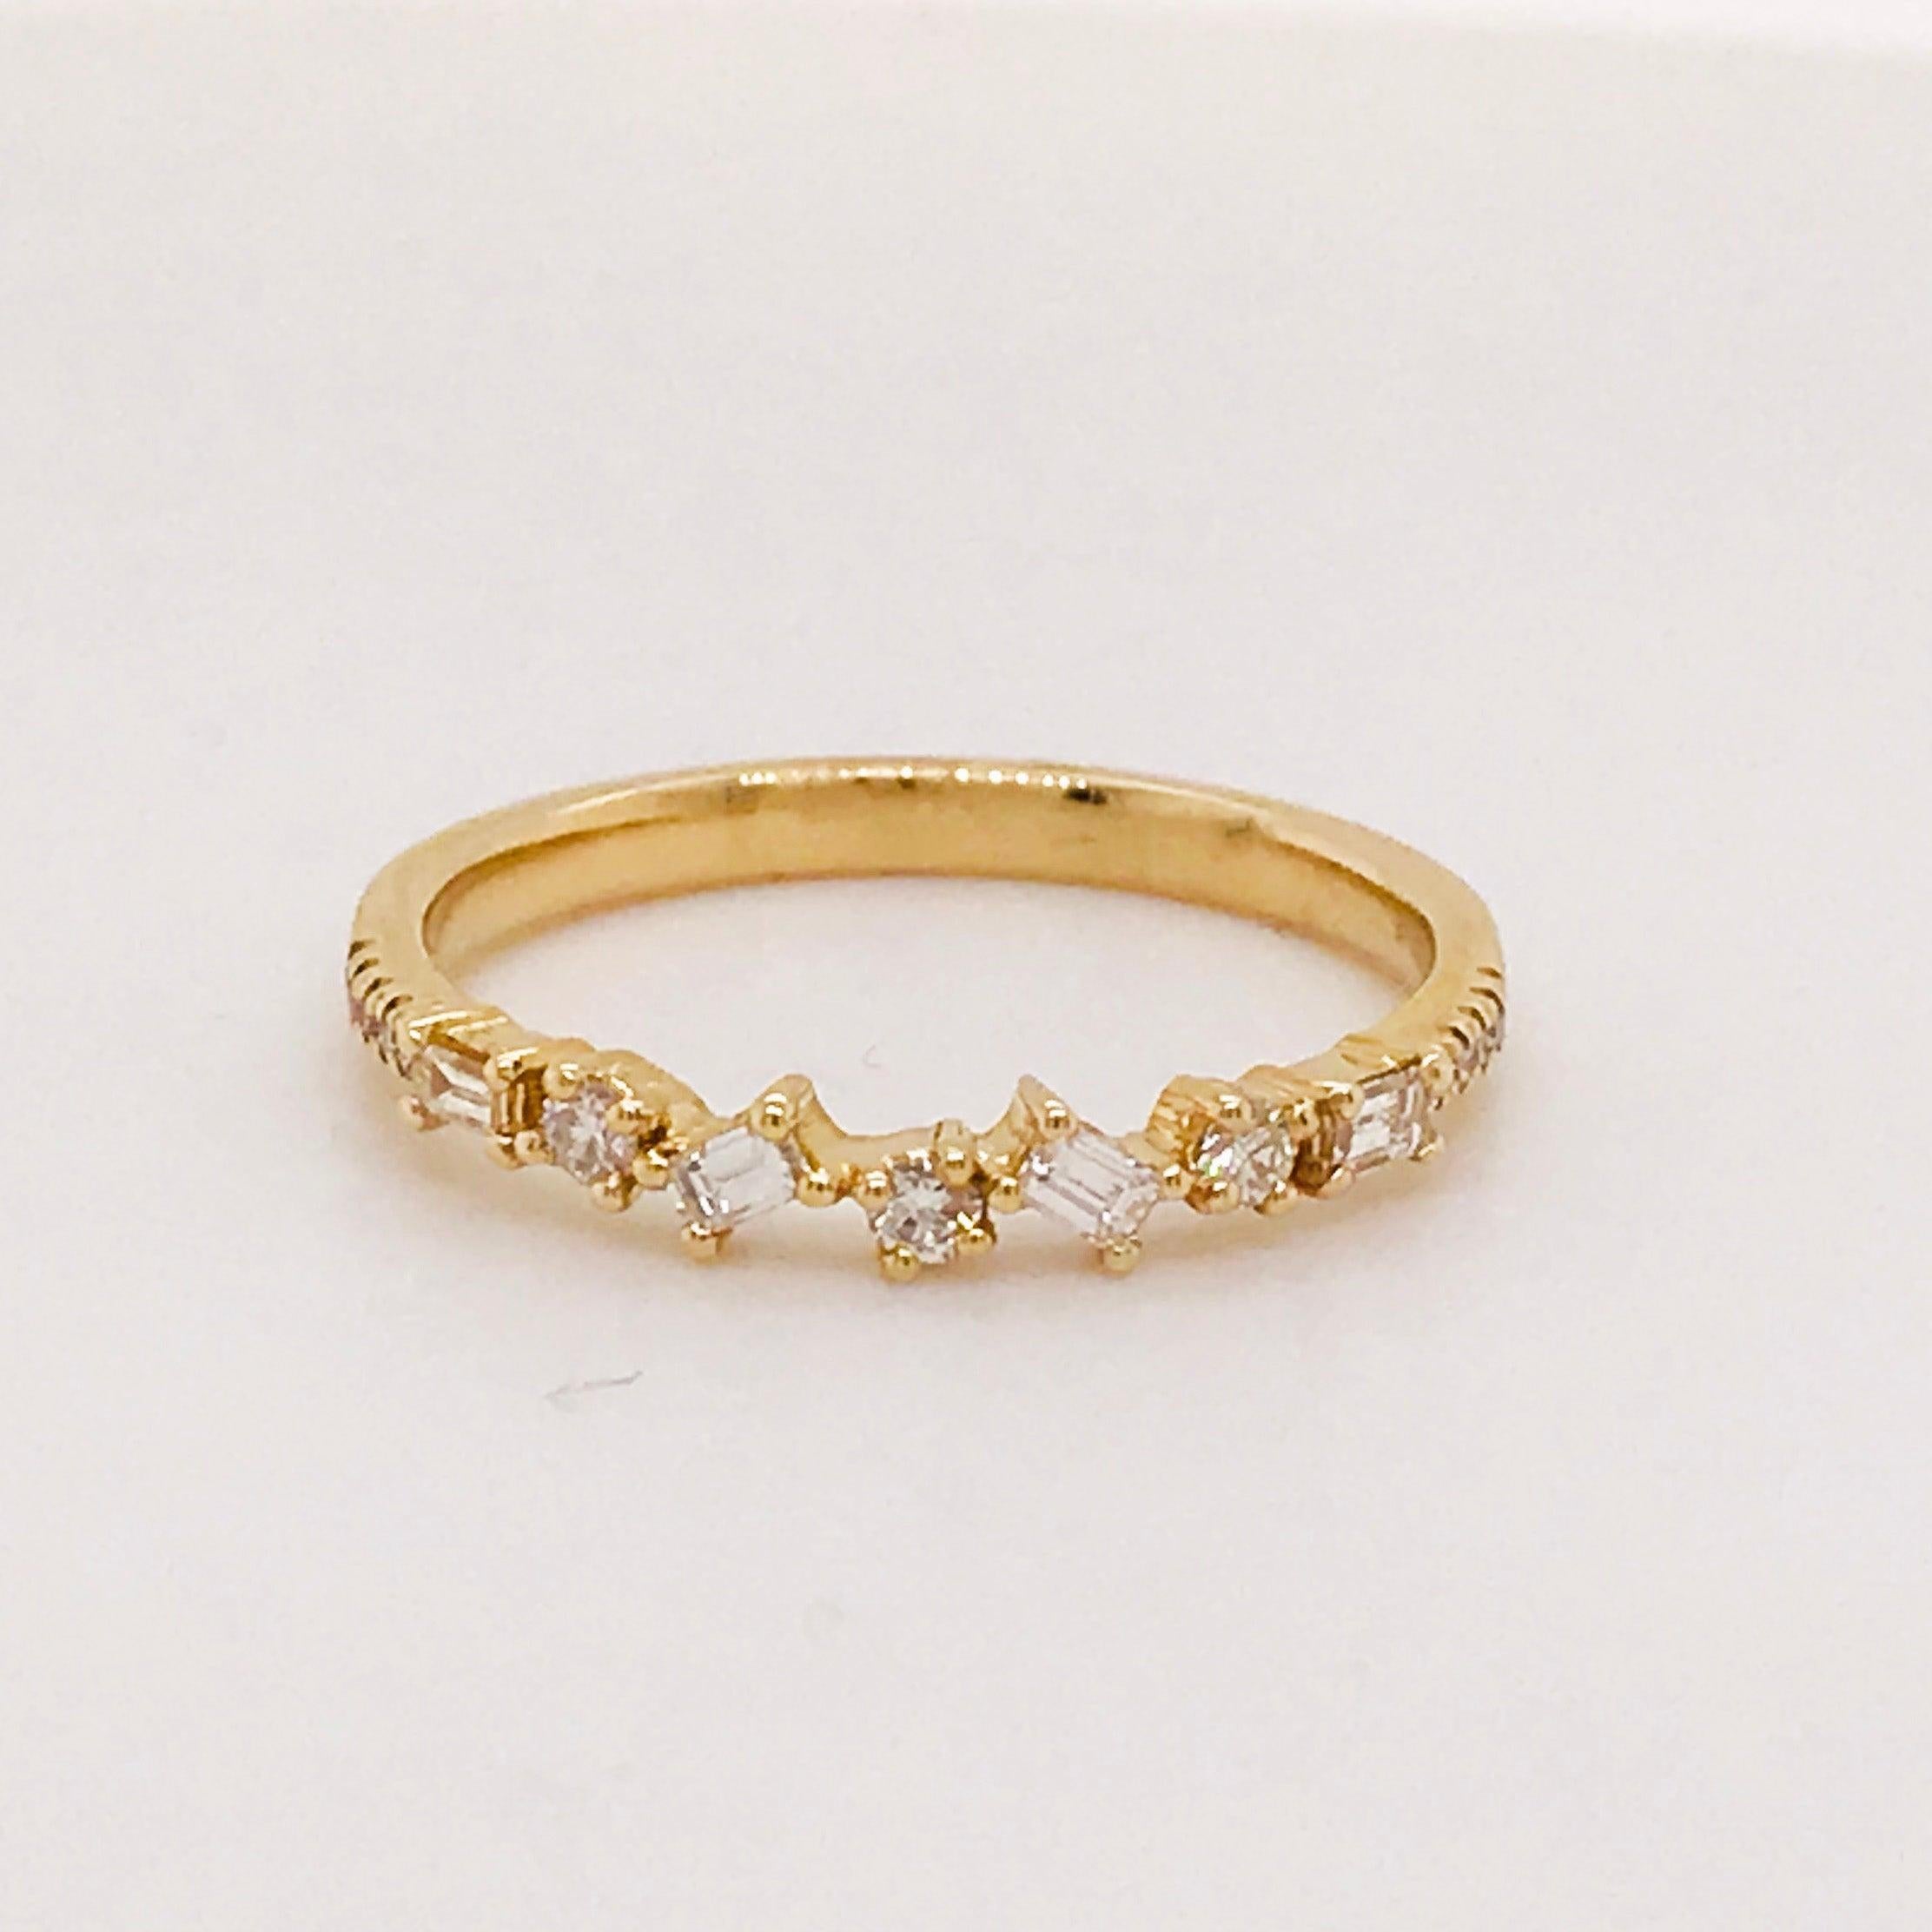 For Sale:  0.17 Carat Diamond Baguette and Round Ring, Stackable Diamond Band in 14k Gold 6